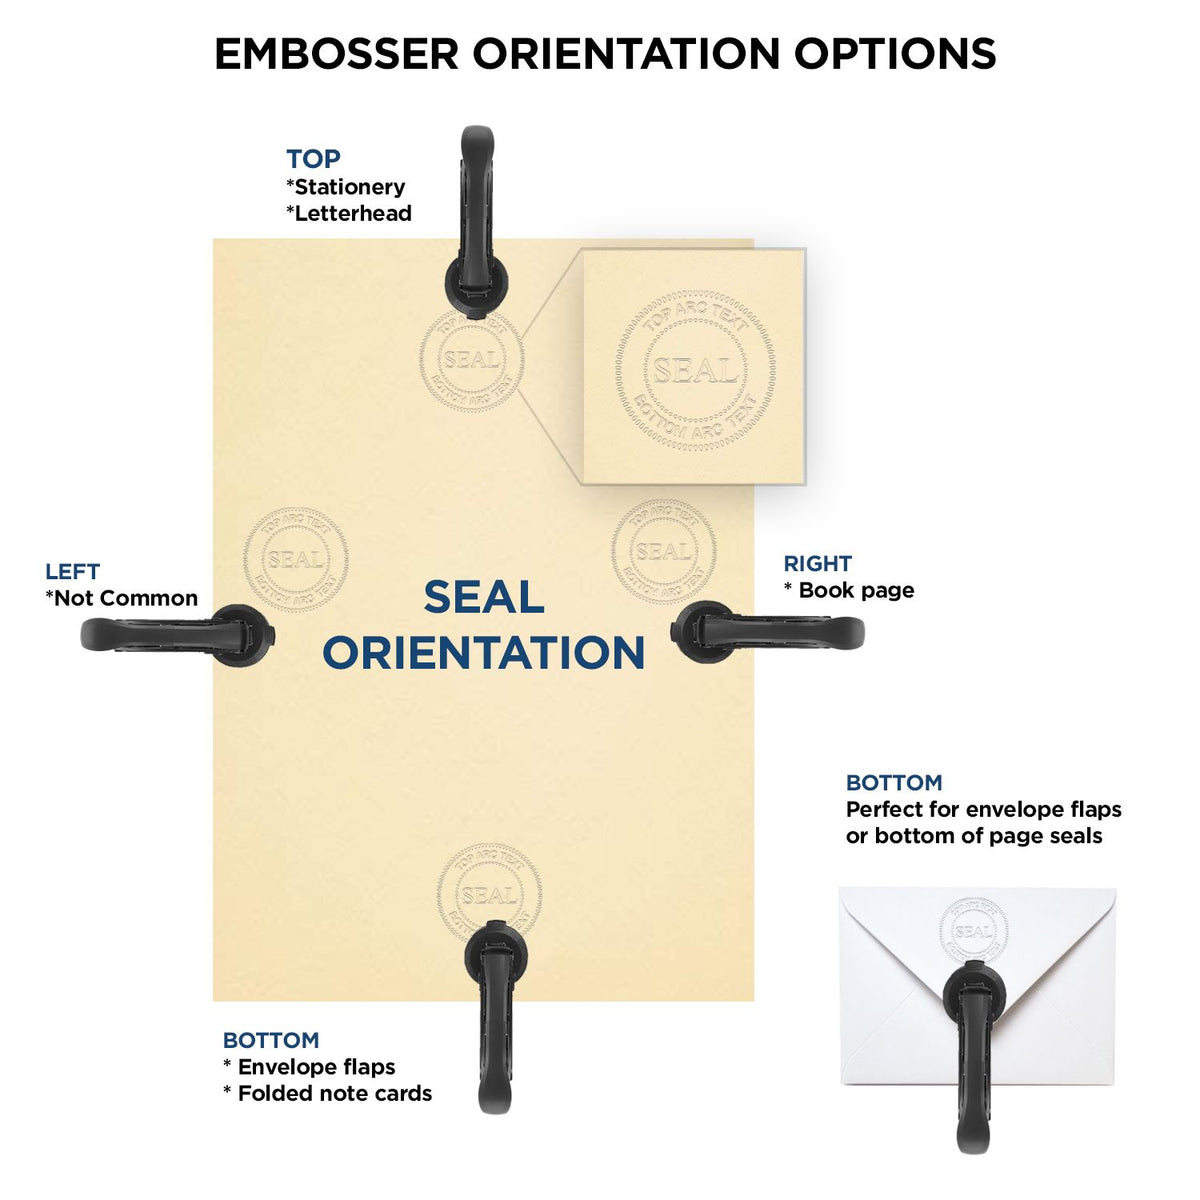 An infographic for the Handheld Michigan Land Surveyor Seal showing embosser orientation, this is showing examples of a top, bottom, right and left insert.